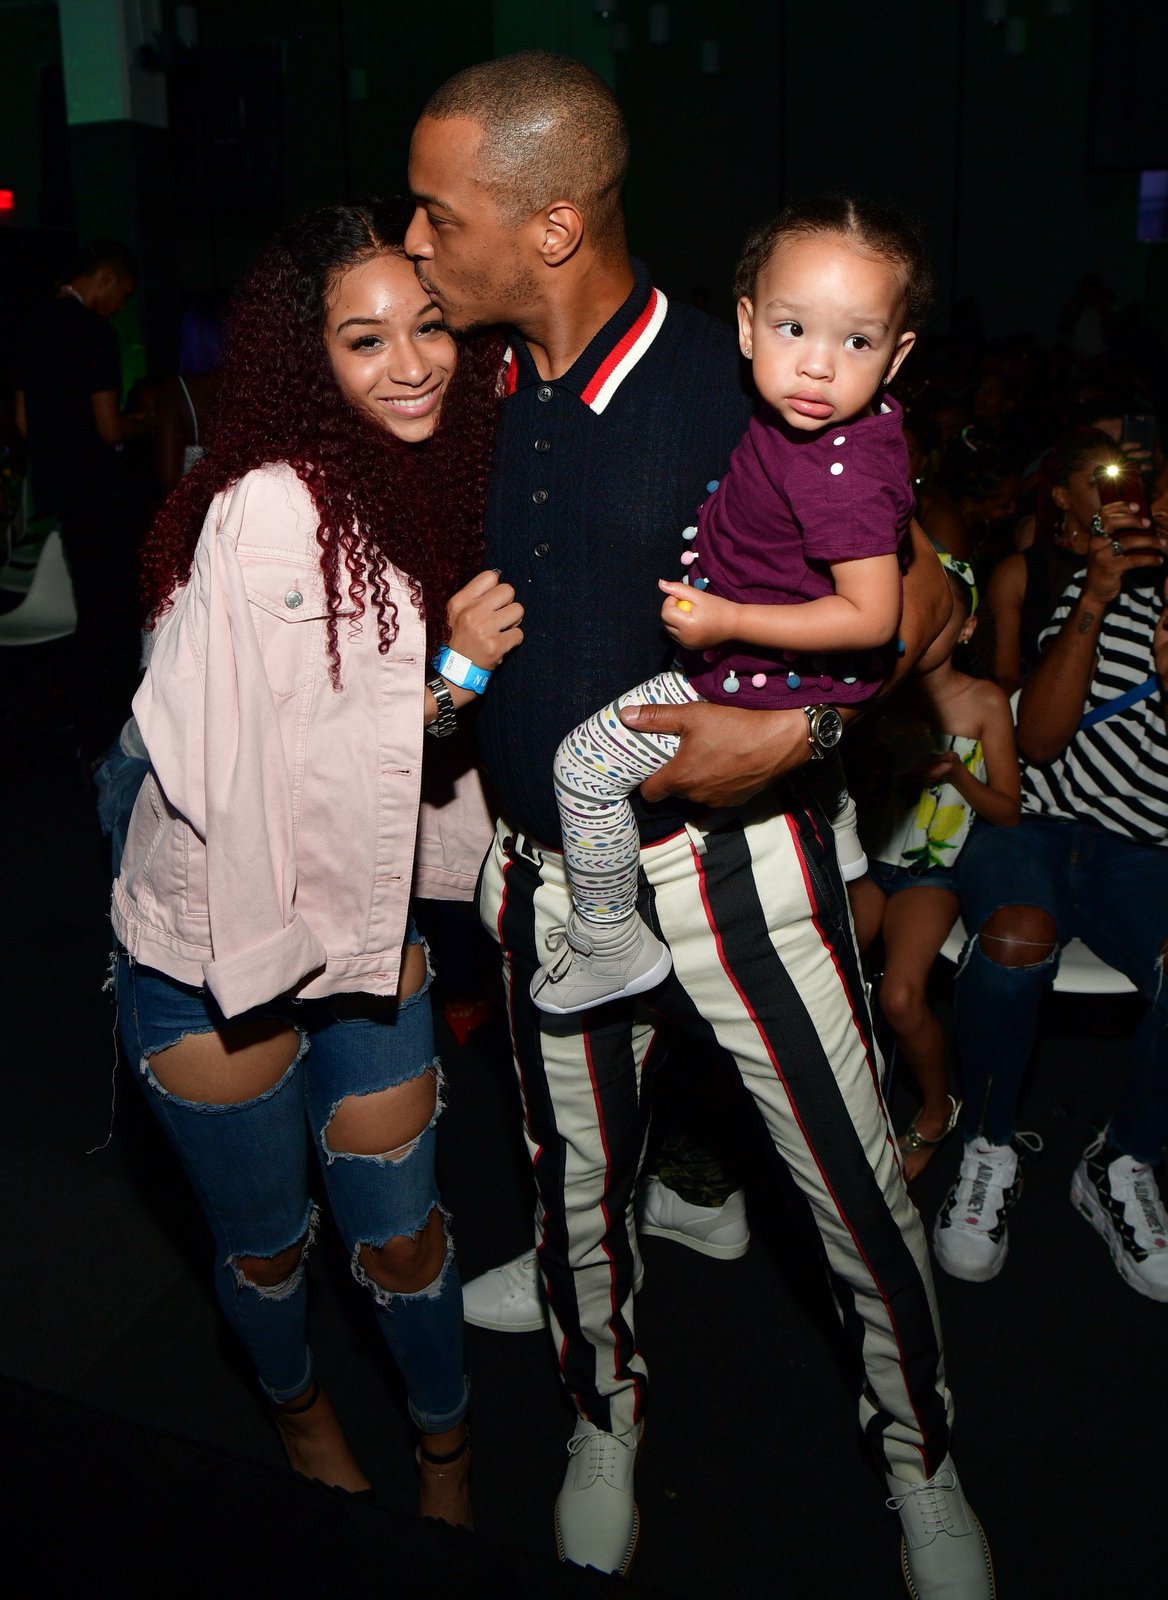 Deyjah Harris with her father T.I and sister at "The Grand Hustle" Viewing Party in Atlanta on July 19, 2018 | Source: Getty Images 